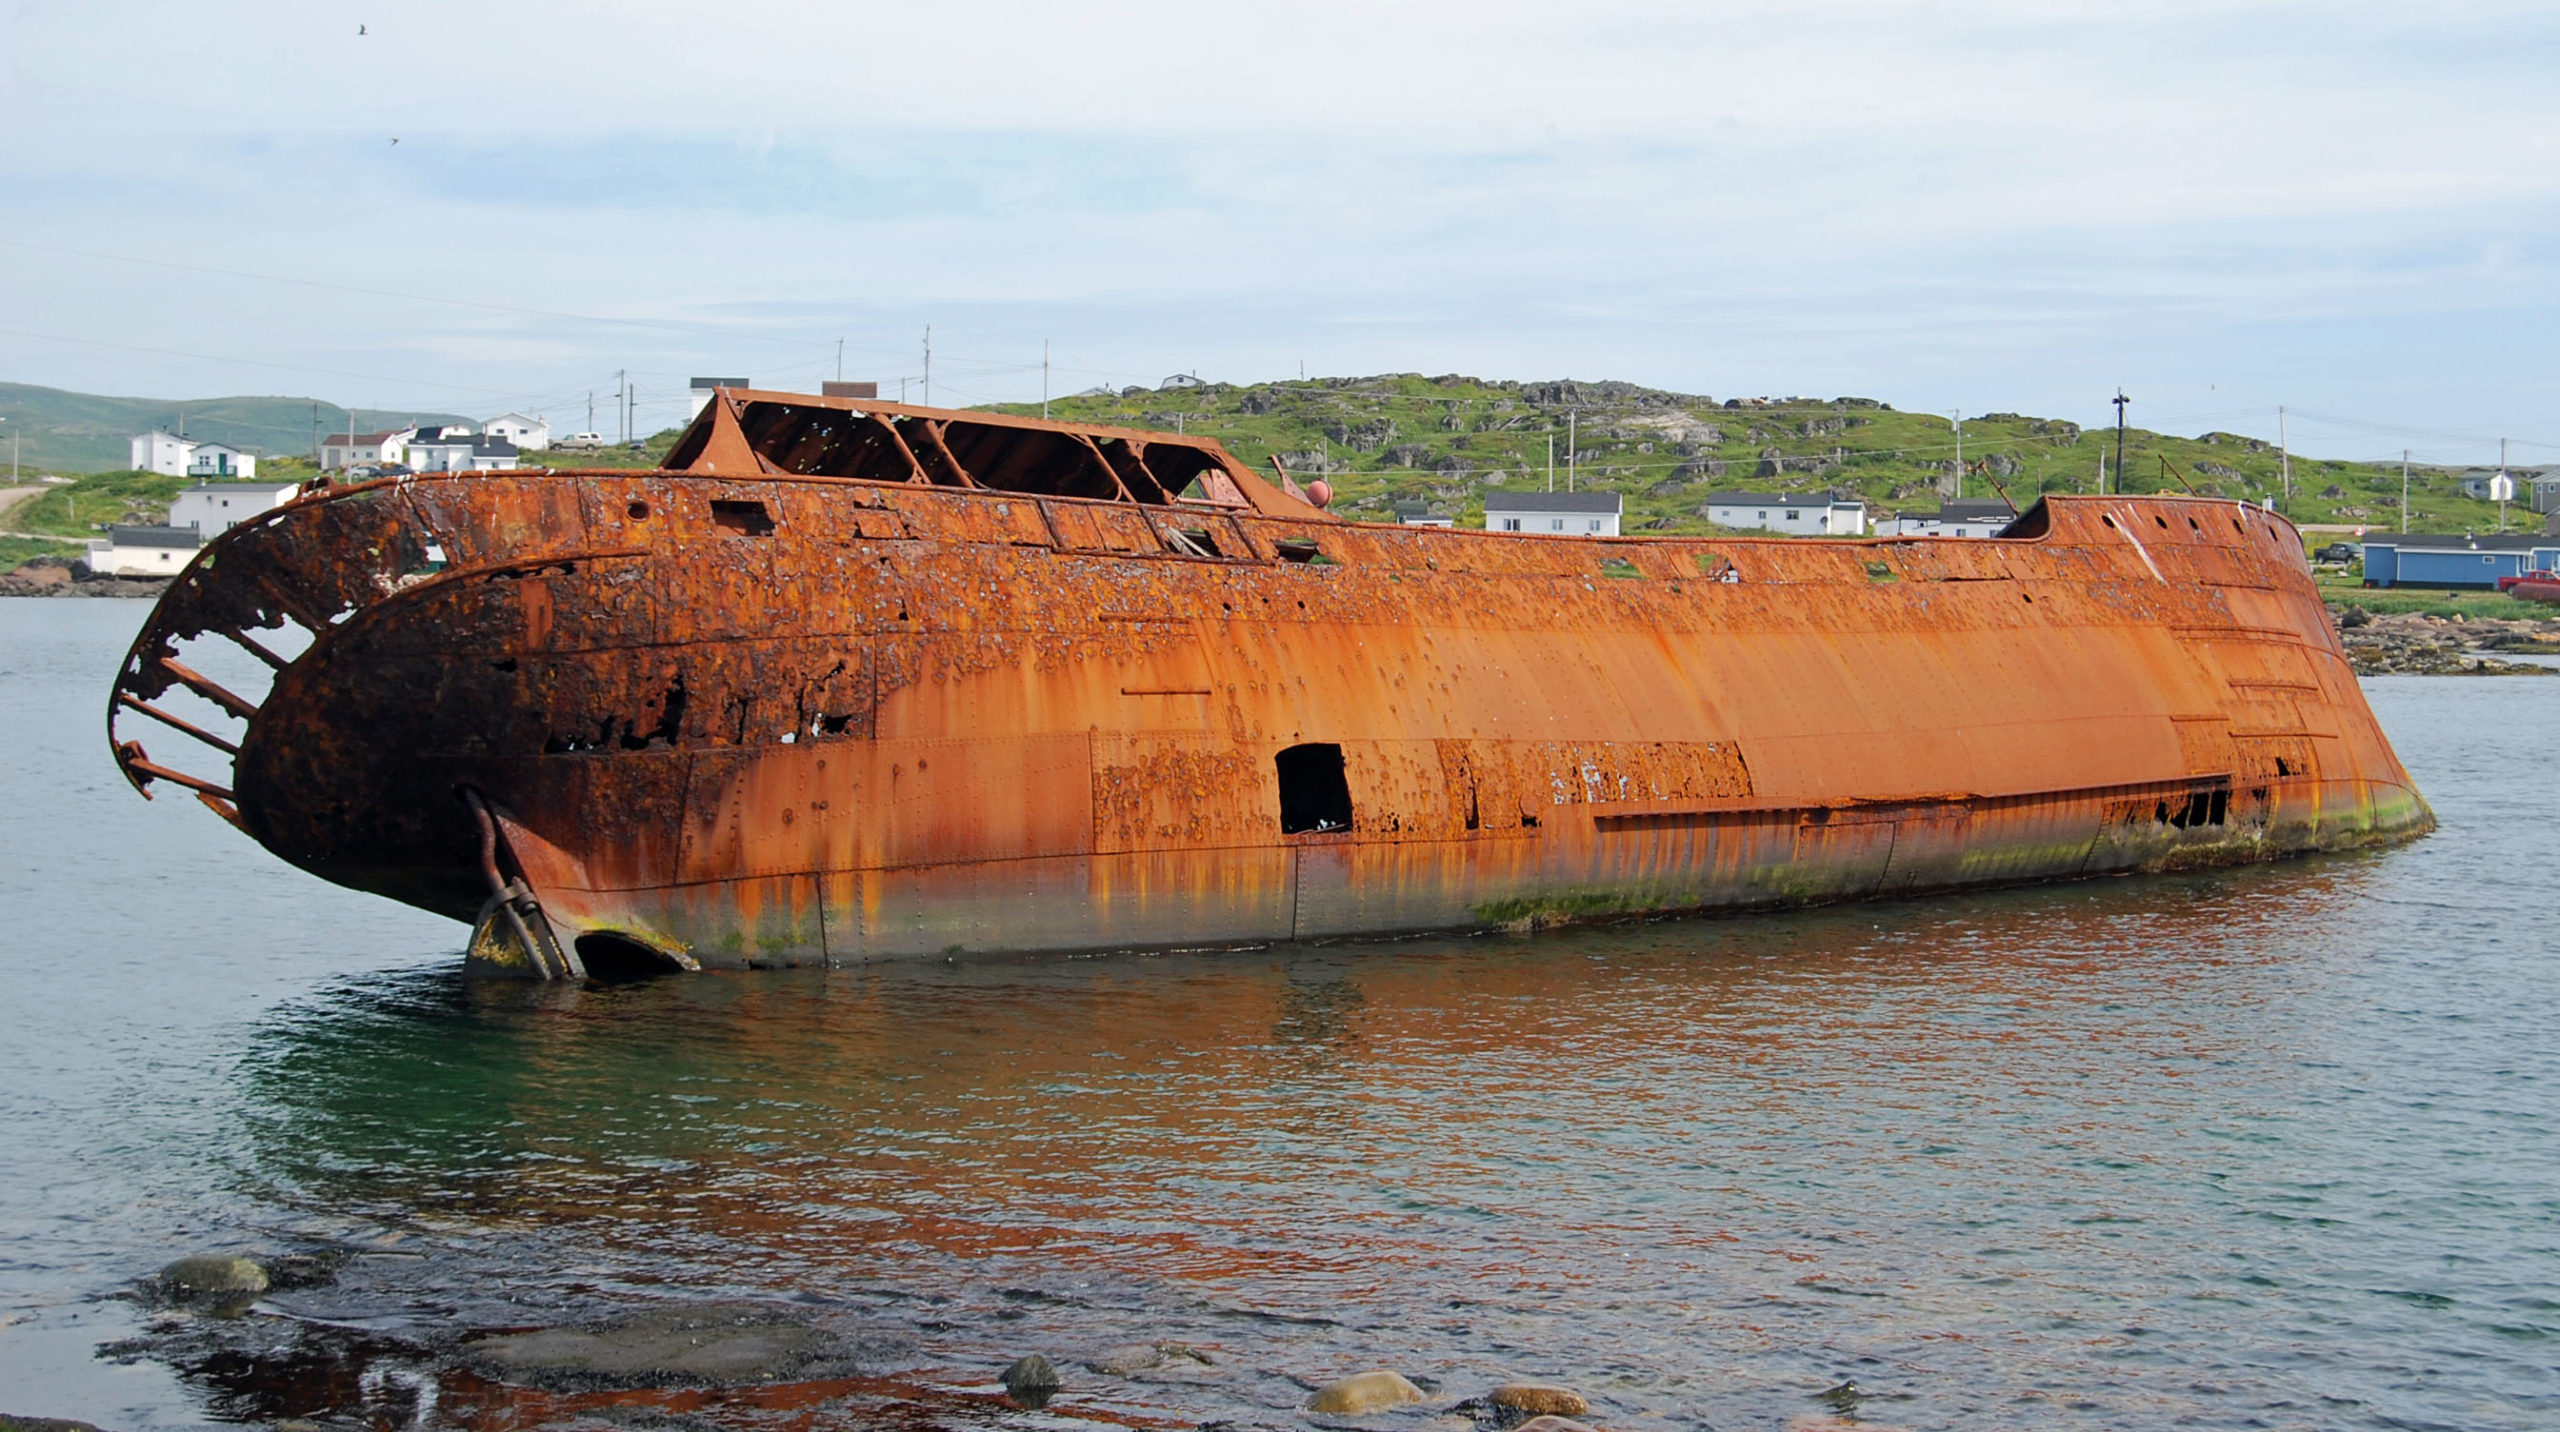 Wreck of the Bernier, Red Bay